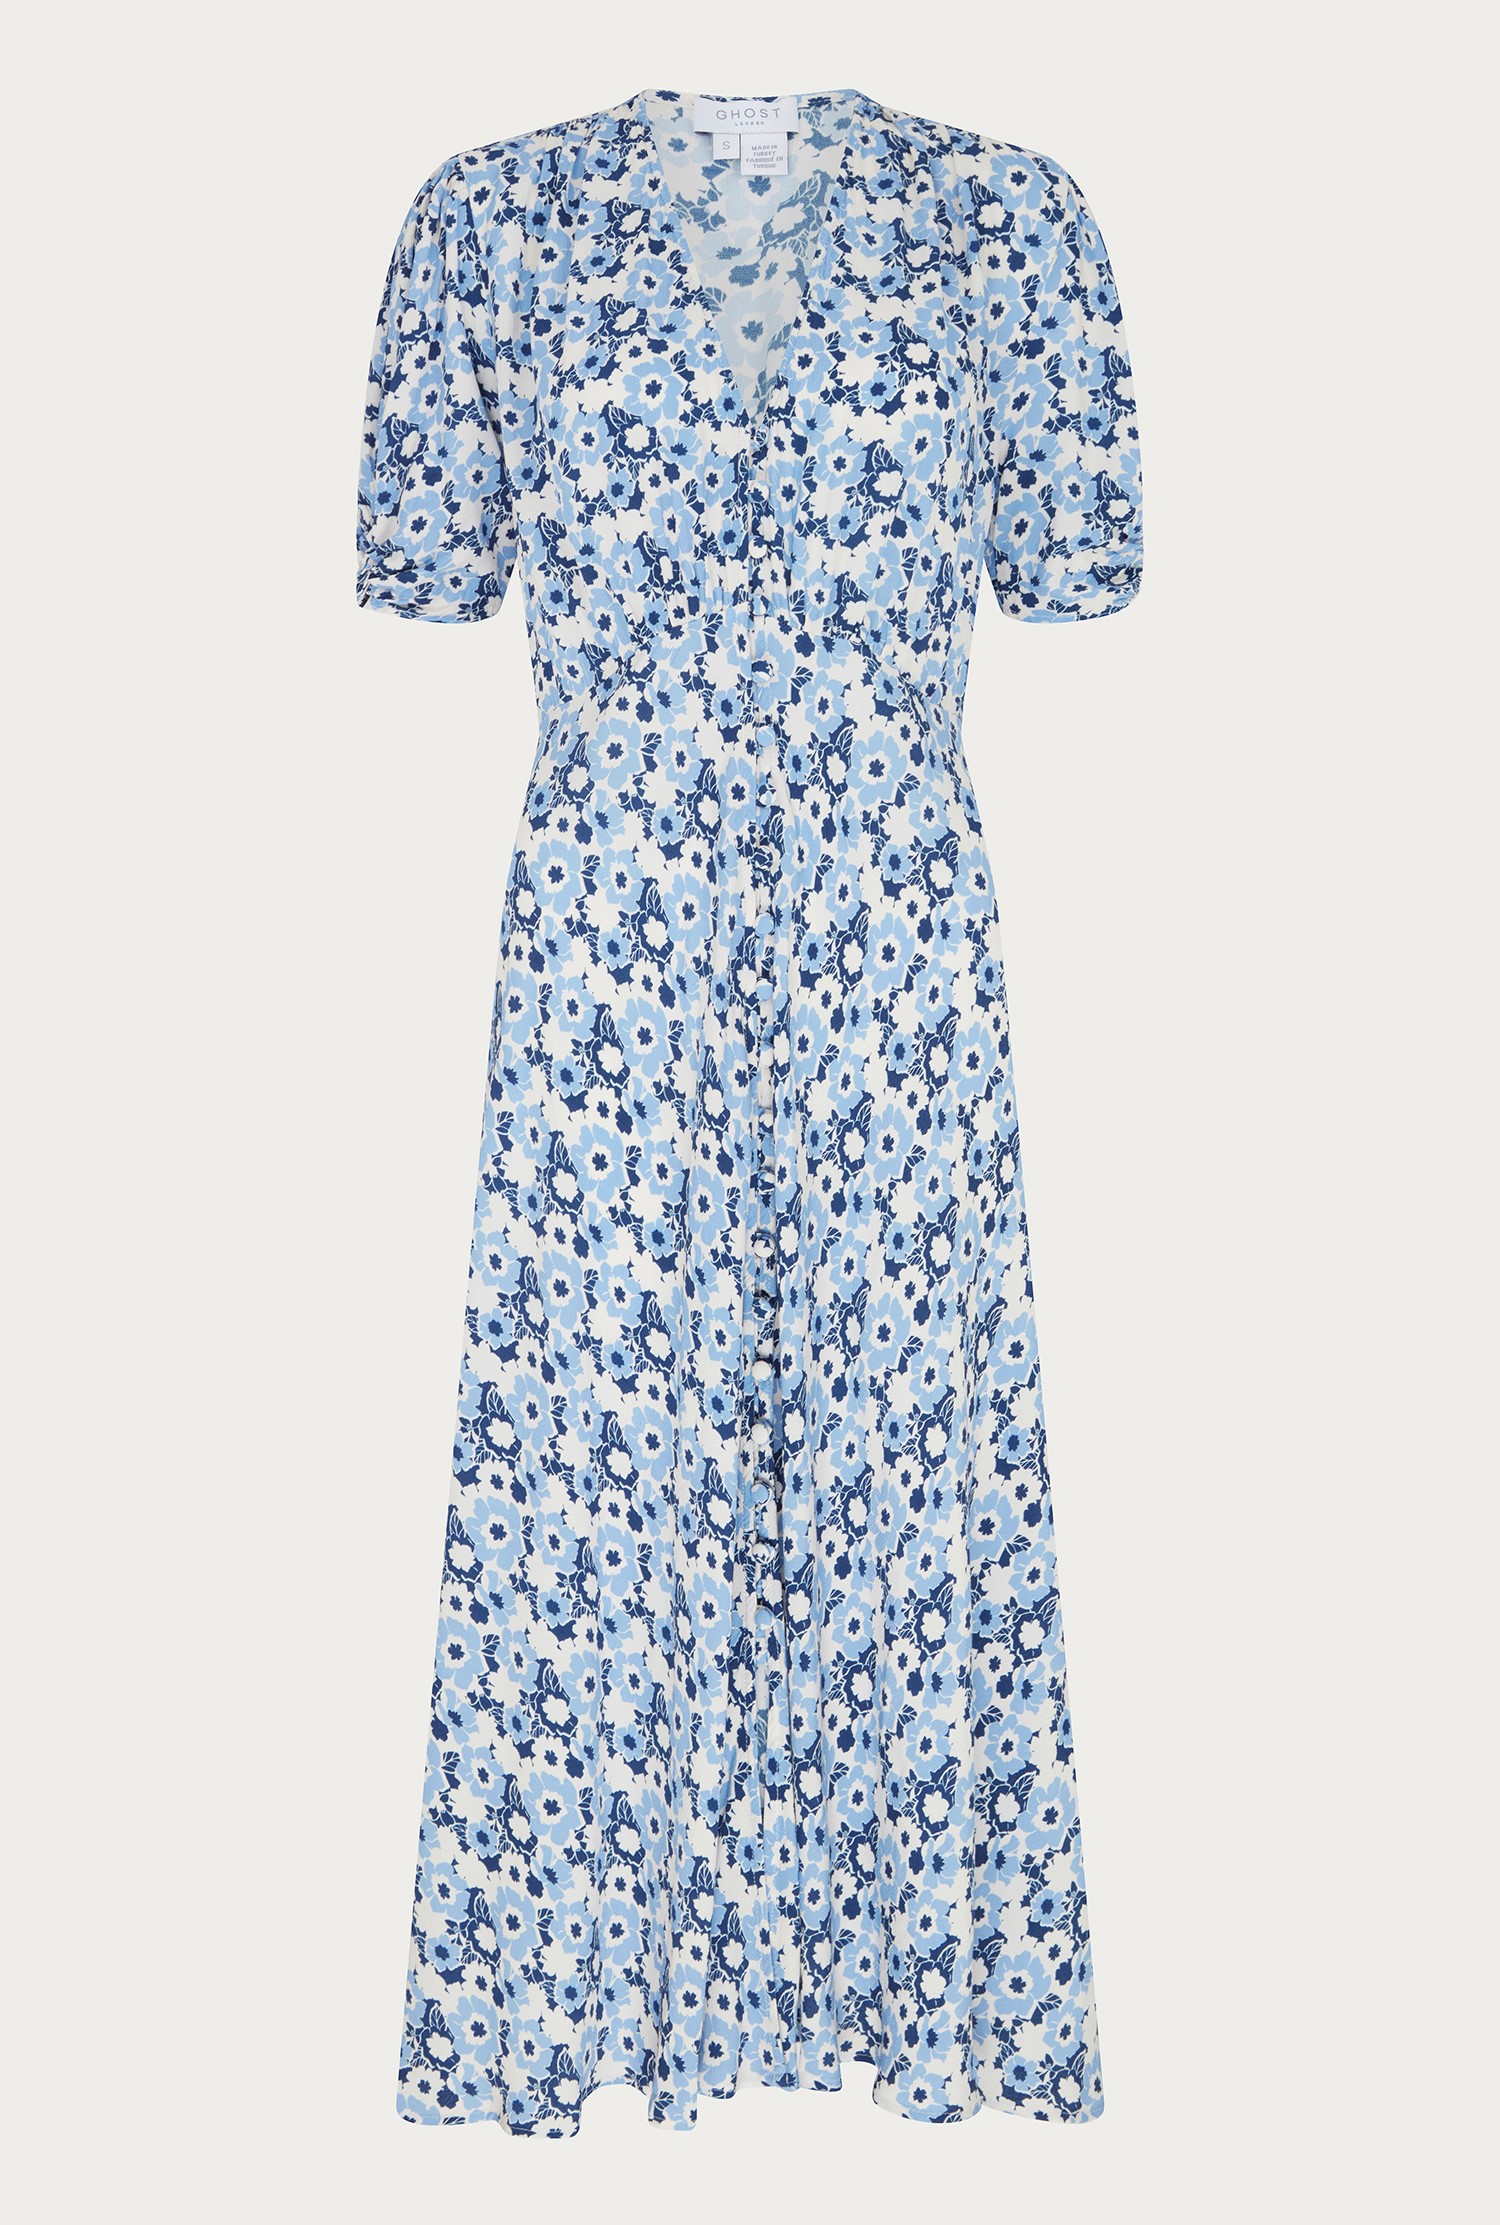 Flo Navy Floral Dress | Ghost London